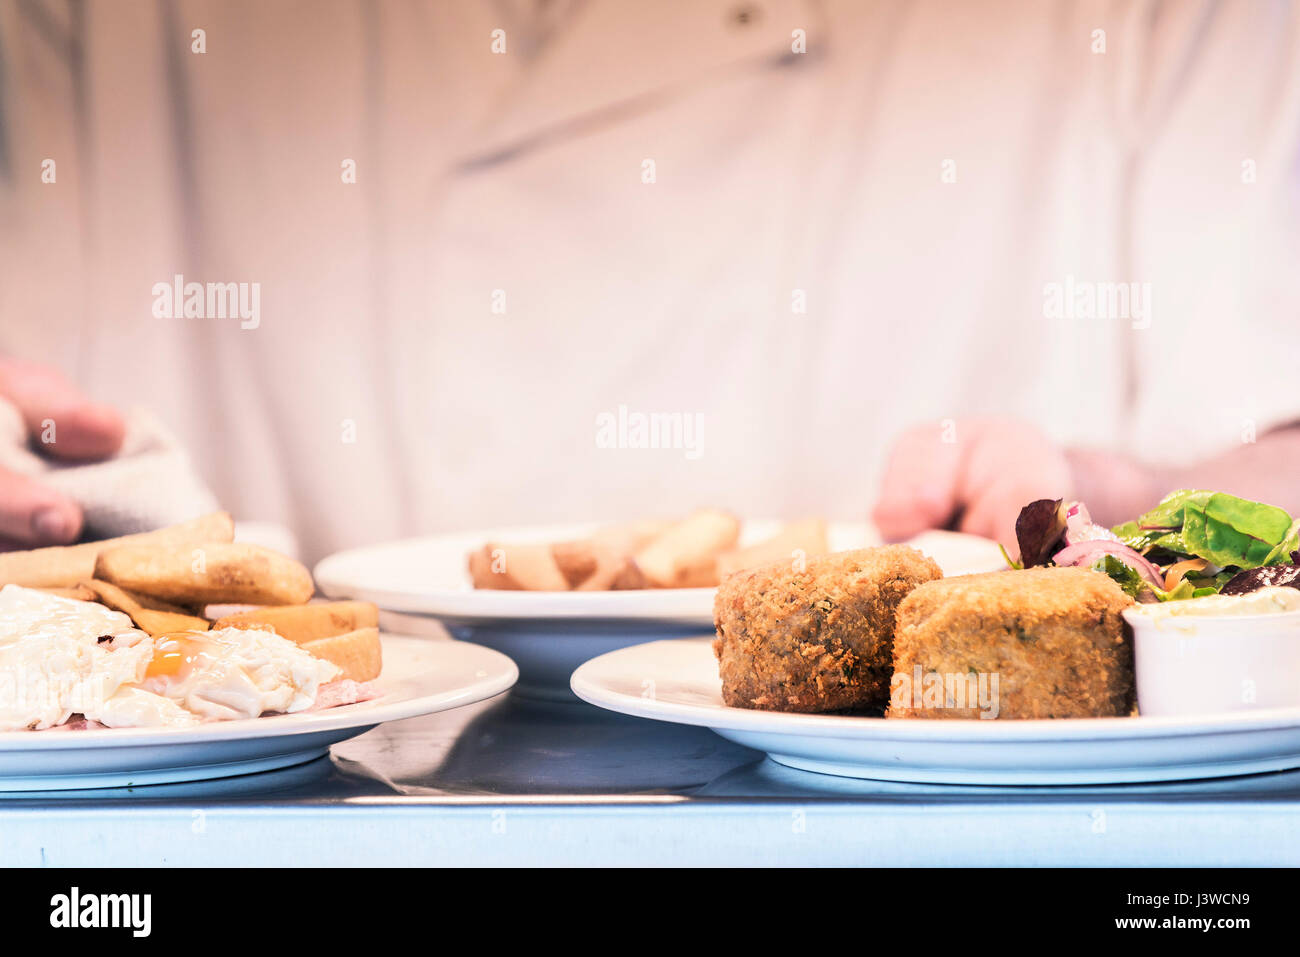 Meals prepared by a chef Restaurant Food preparation Food industry Dishes Stock Photo